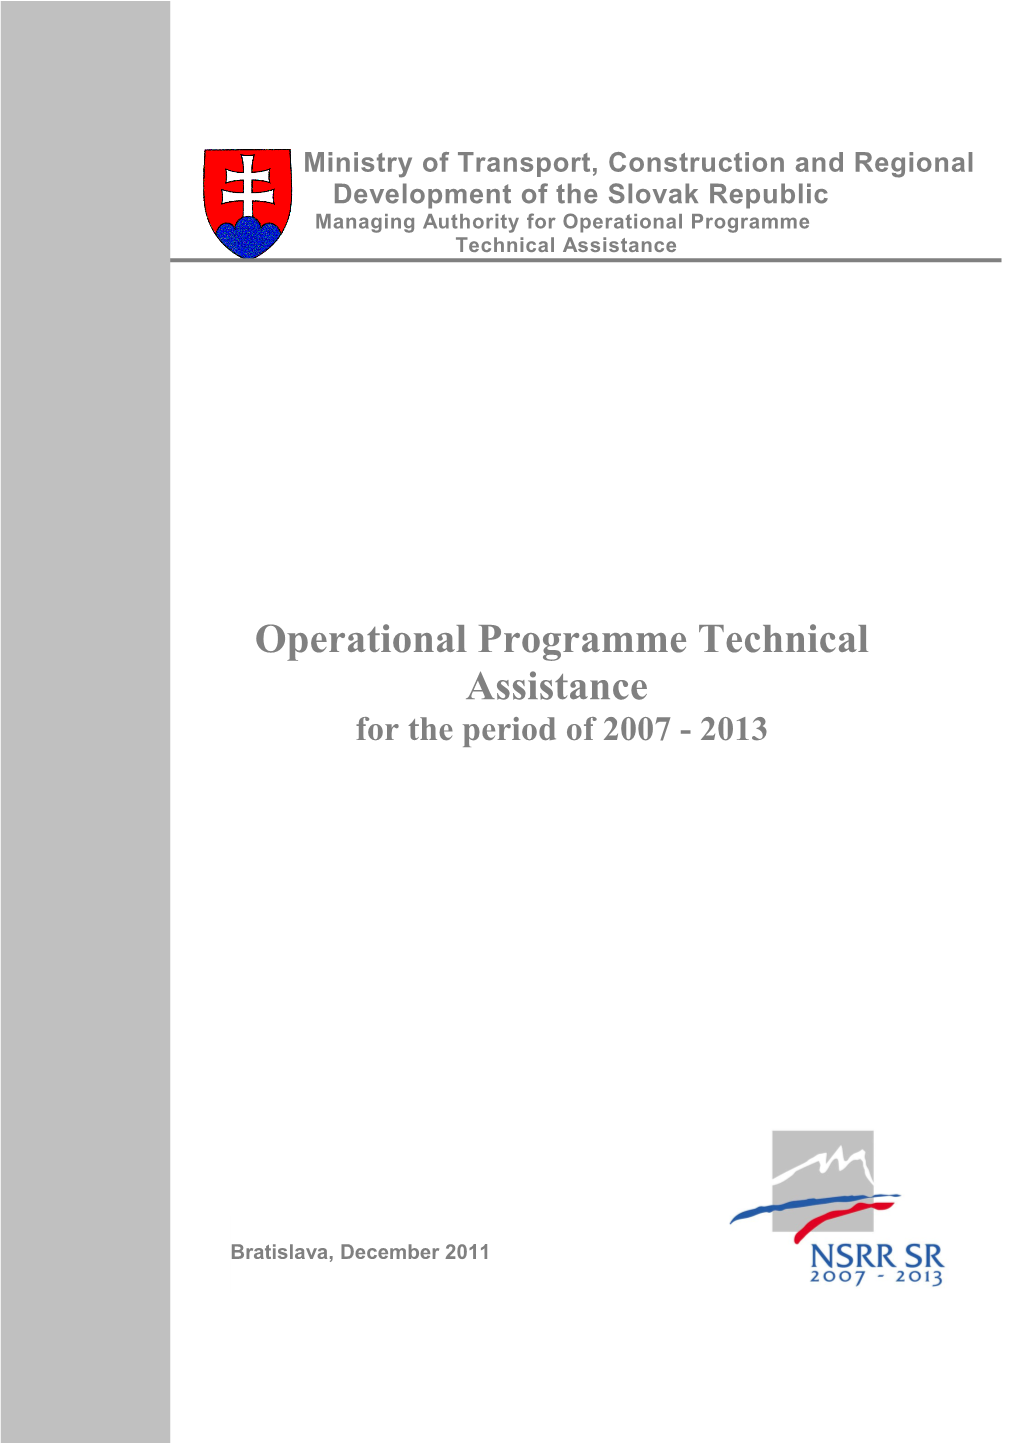 Operational Programme Technical Assistance